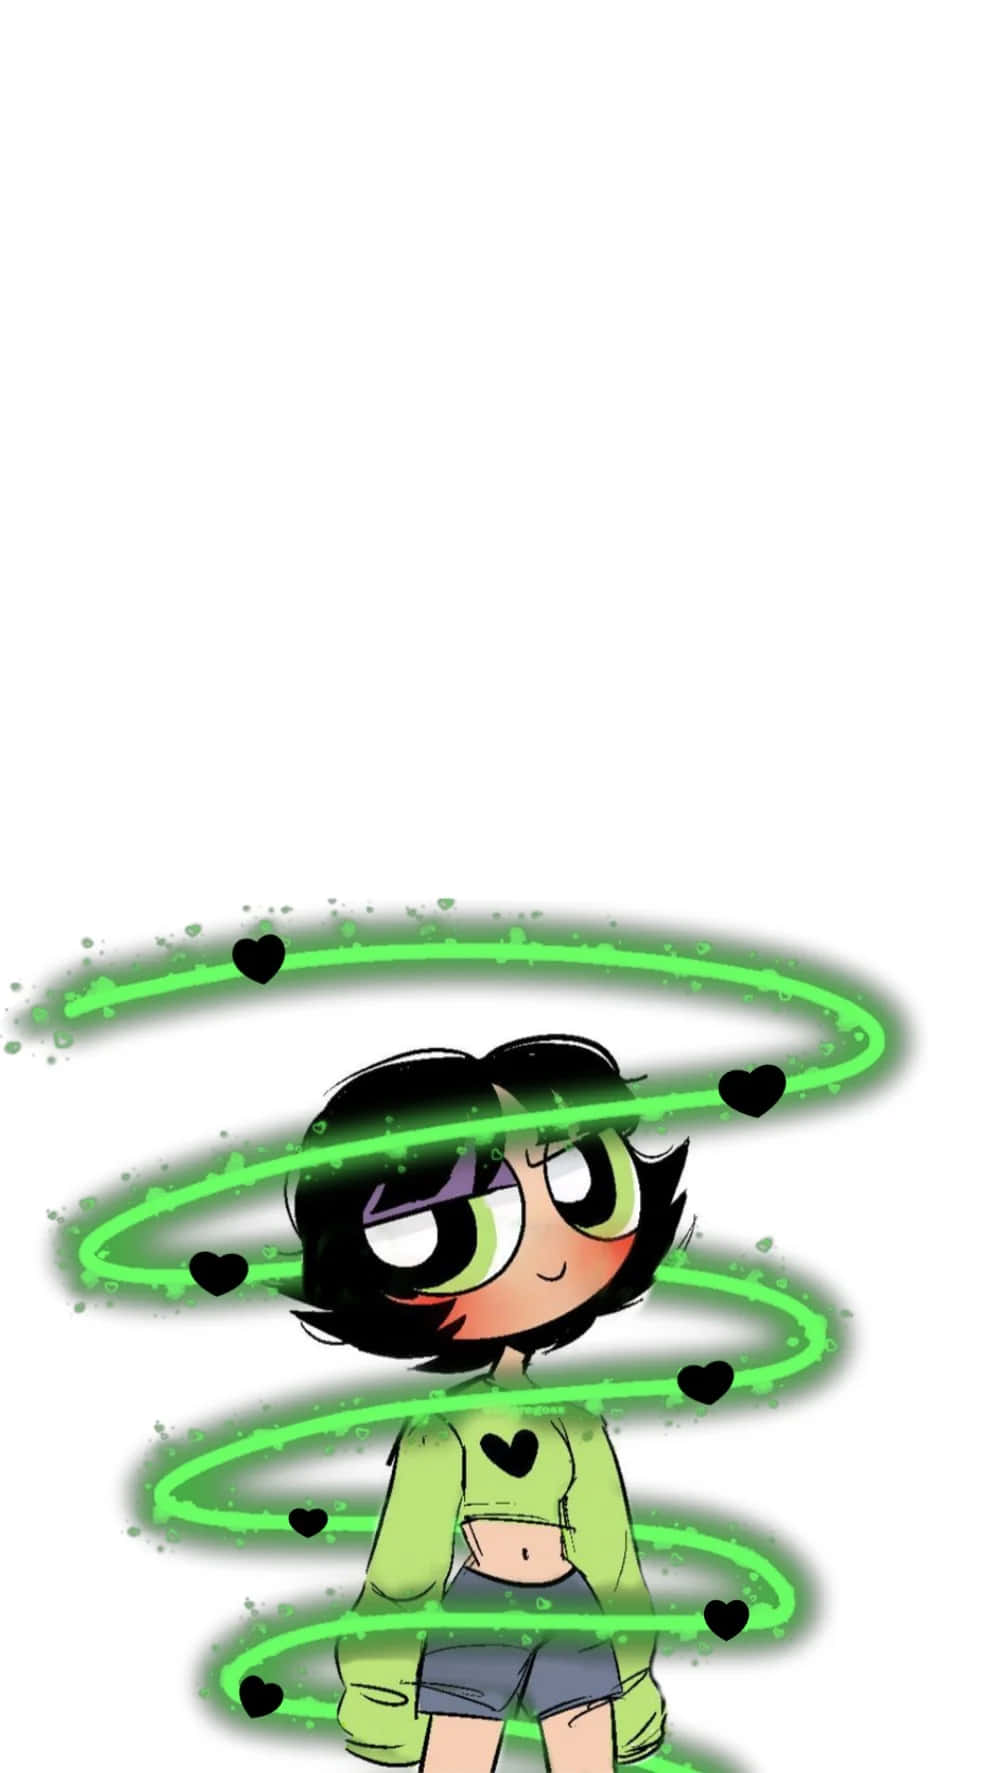 A cartoon girl with green hair and hearts - Buttercup